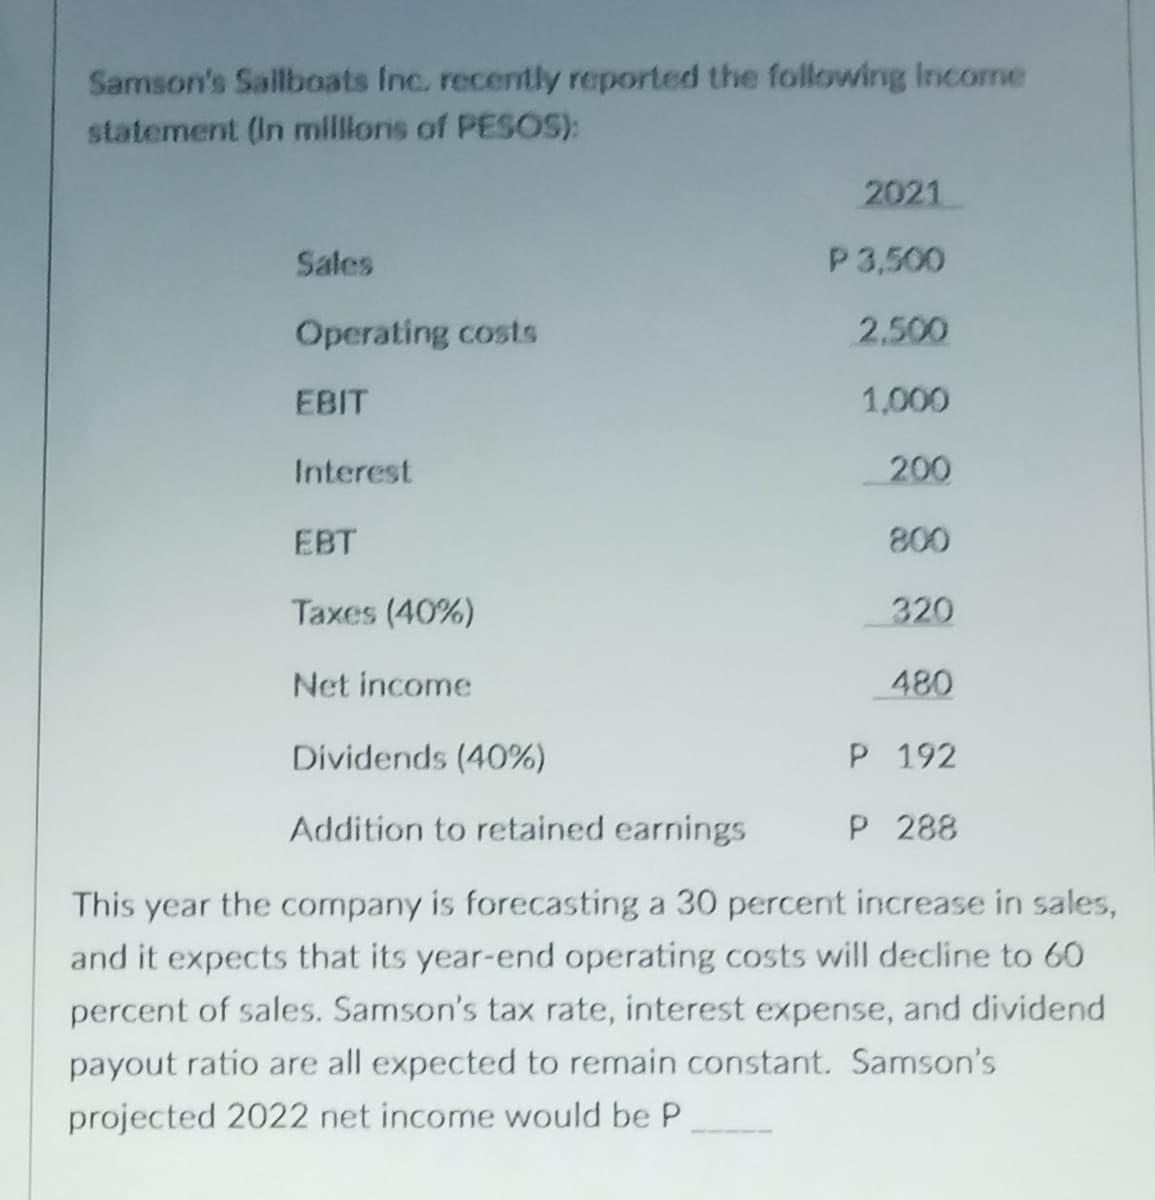 Samson's Sailboats Inc. recently reported the following Income
statement (in millions of PESOS):
2021
Sales
P 3,500
Operating costs
2,500
EBIT
1,000
Interest
200
EBT
800
Taxes (40%)
320
Net income
480
Dividends (40%)
P 192
Addition to retained earnings
P 288
This year the company is forecasting a 30 percent increase in sales,
and it expects that its year-end operating costs will decline to 60
percent of sales. Samson's tax rate, interest expense, and dividend
payout ratio are all expected to remain constant. Samson's
projected 2022 net income would be P